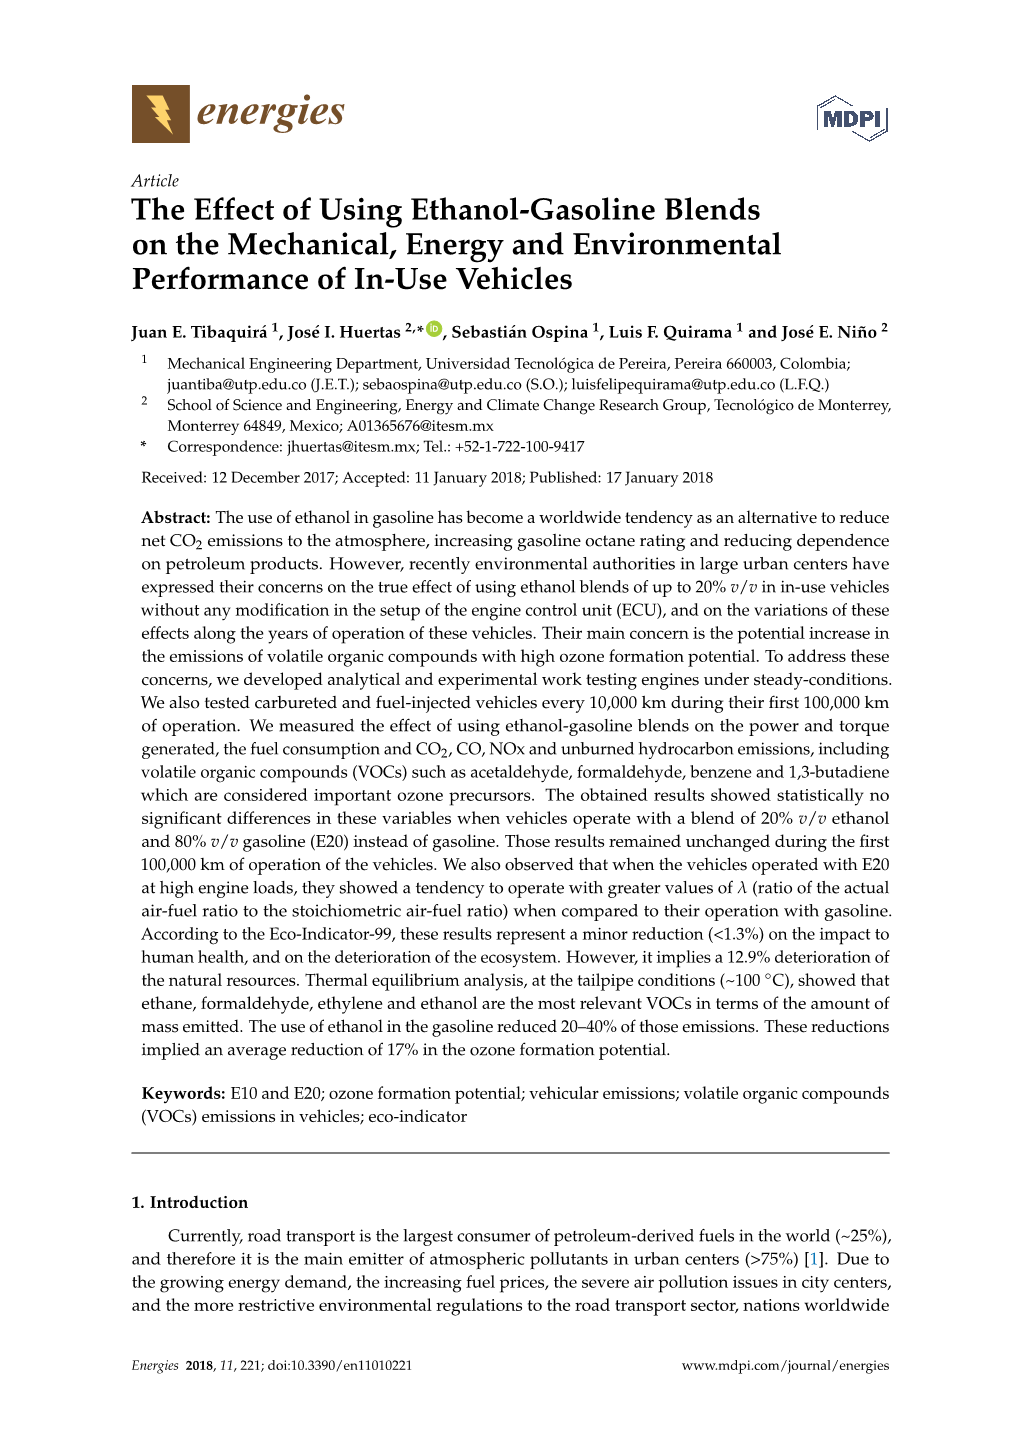 The Effect of Using Ethanol-Gasoline Blends on the Mechanical, Energy and Environmental Performance of In-Use Vehicles